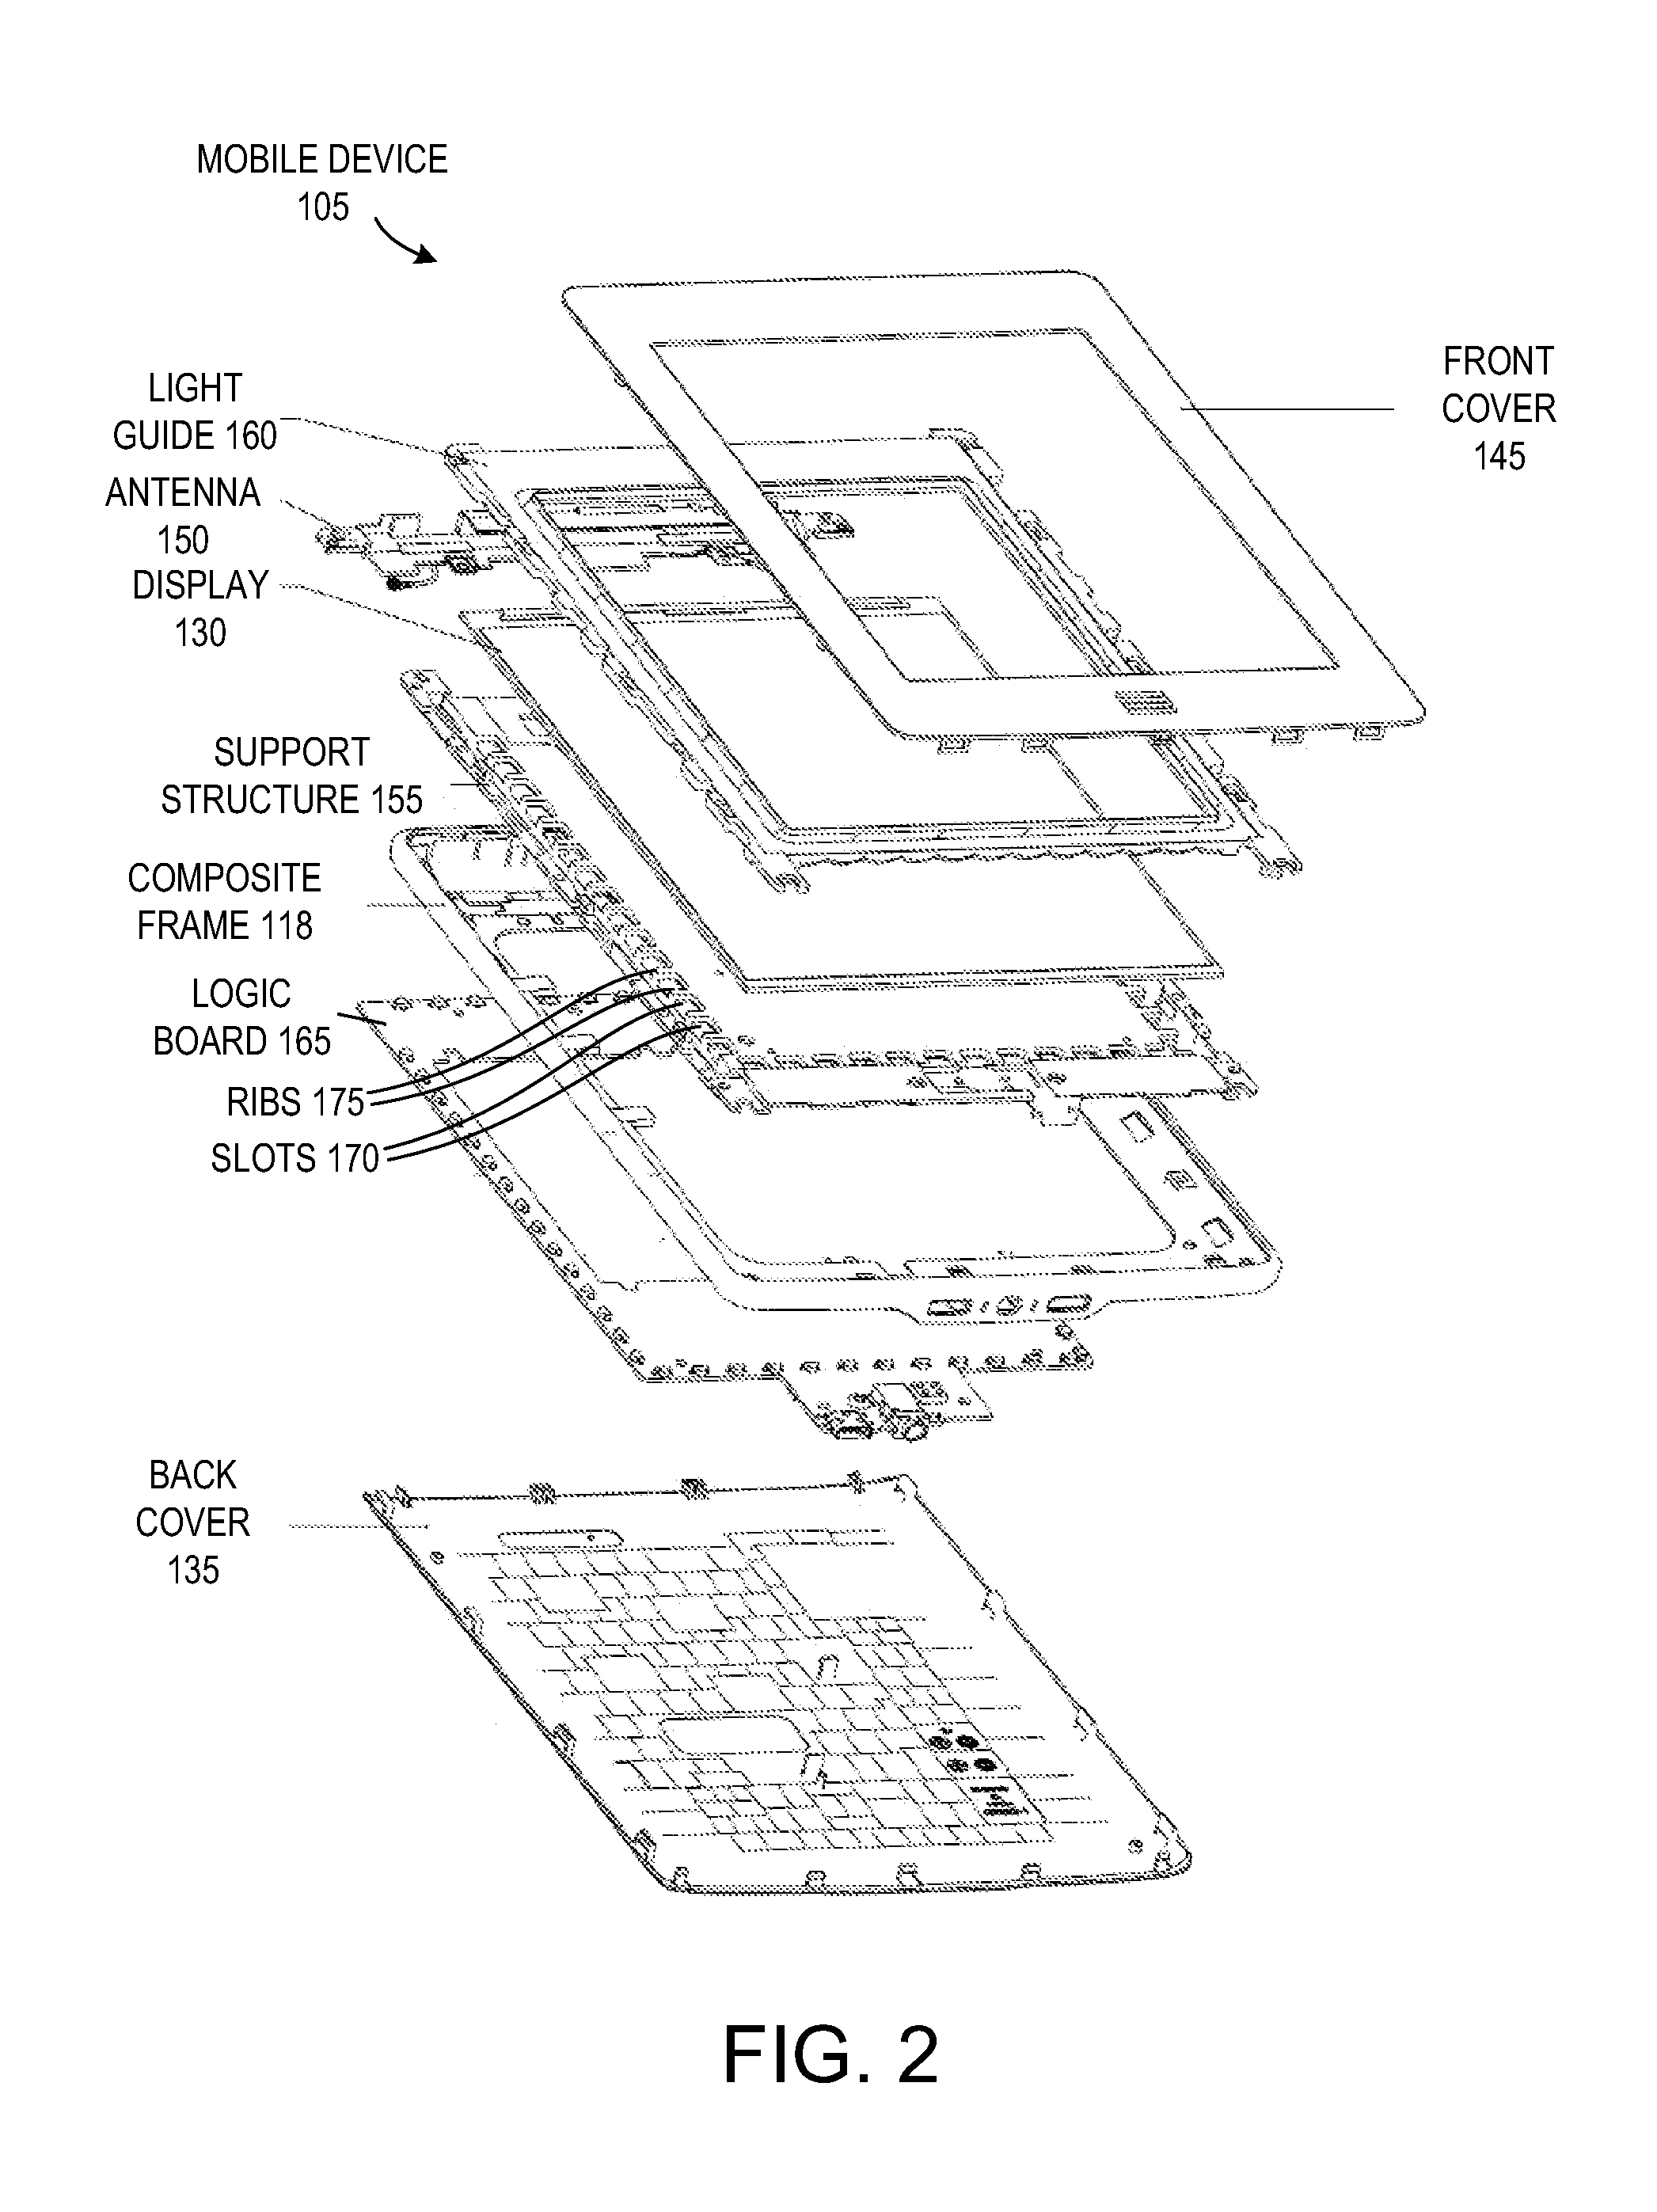 Internal metal support structure for mobile device